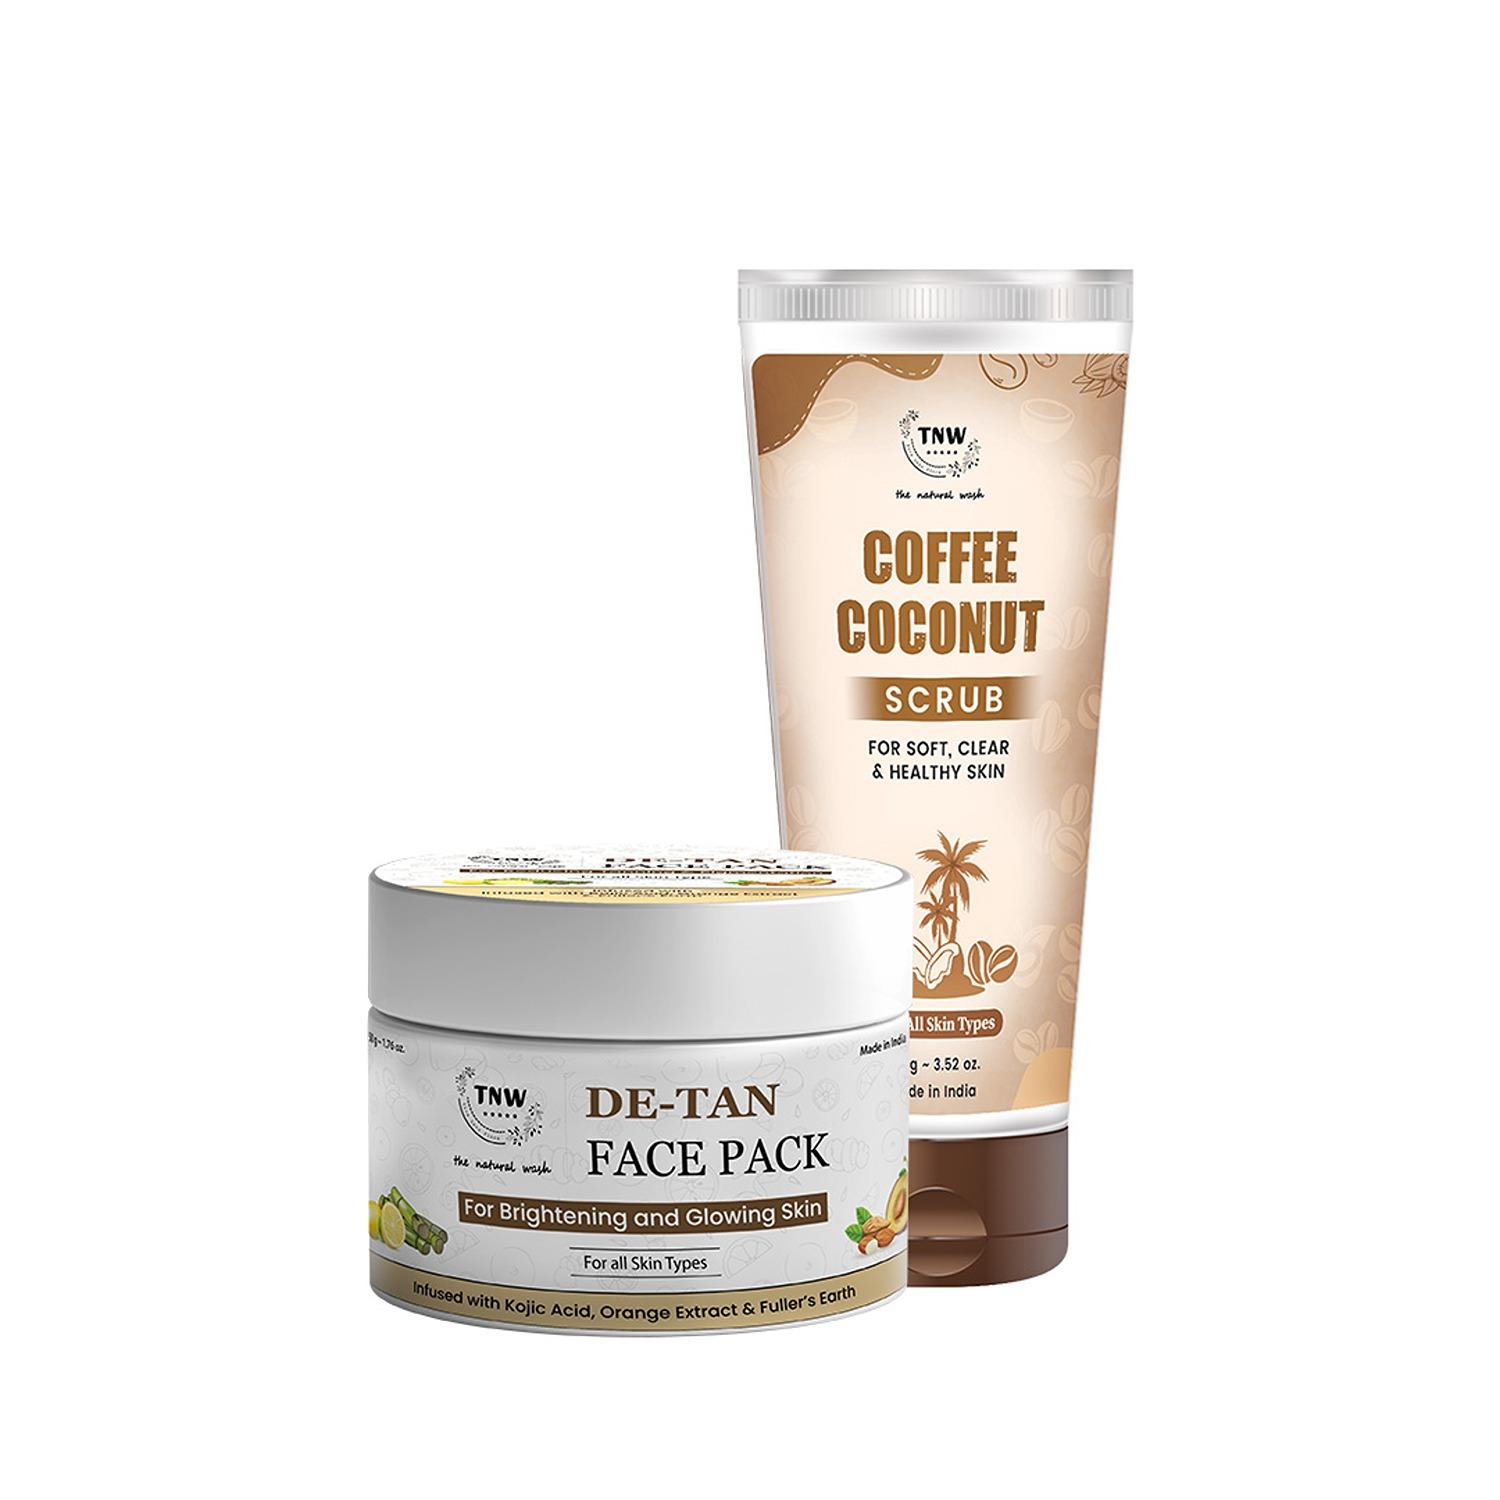 TNW The Natural Wash | TNW The Natural Wash Coffee Coconut Scrub and De Tan Face Pack Combo